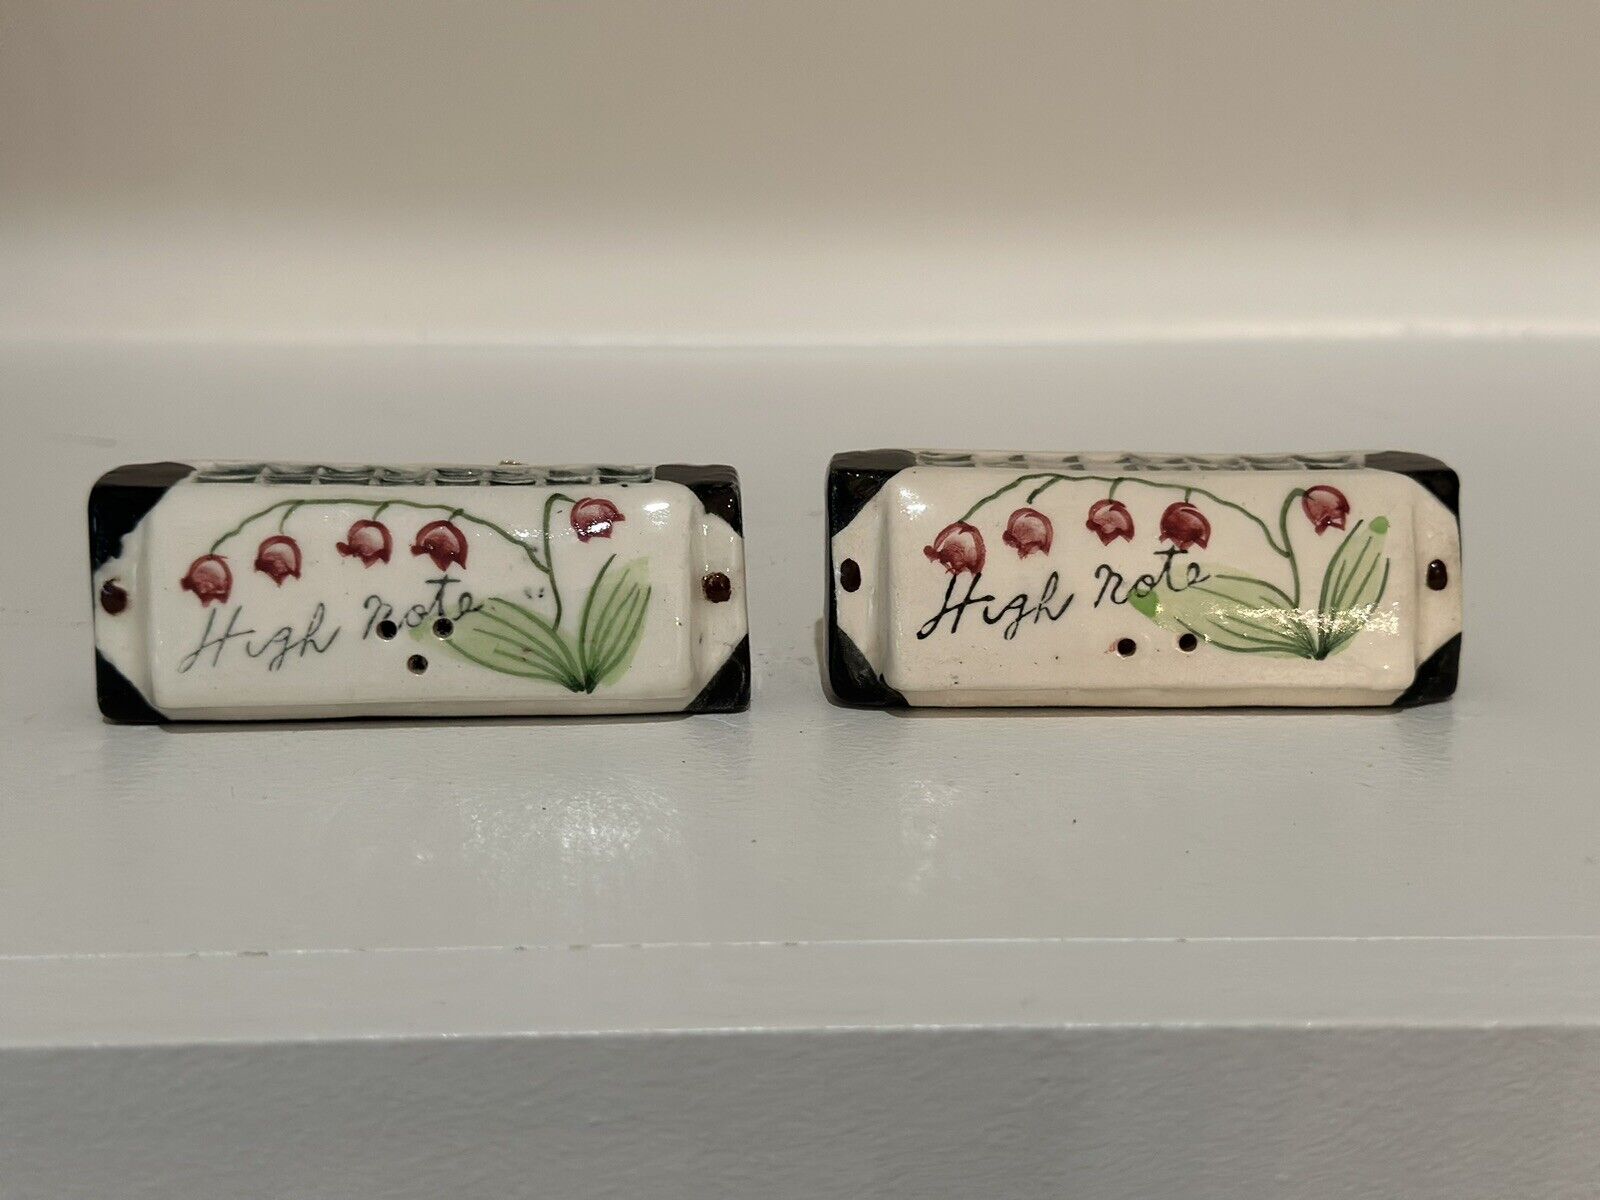 Harmonica High Note Ceramic Salt and Pepper Shakers Made in Japan